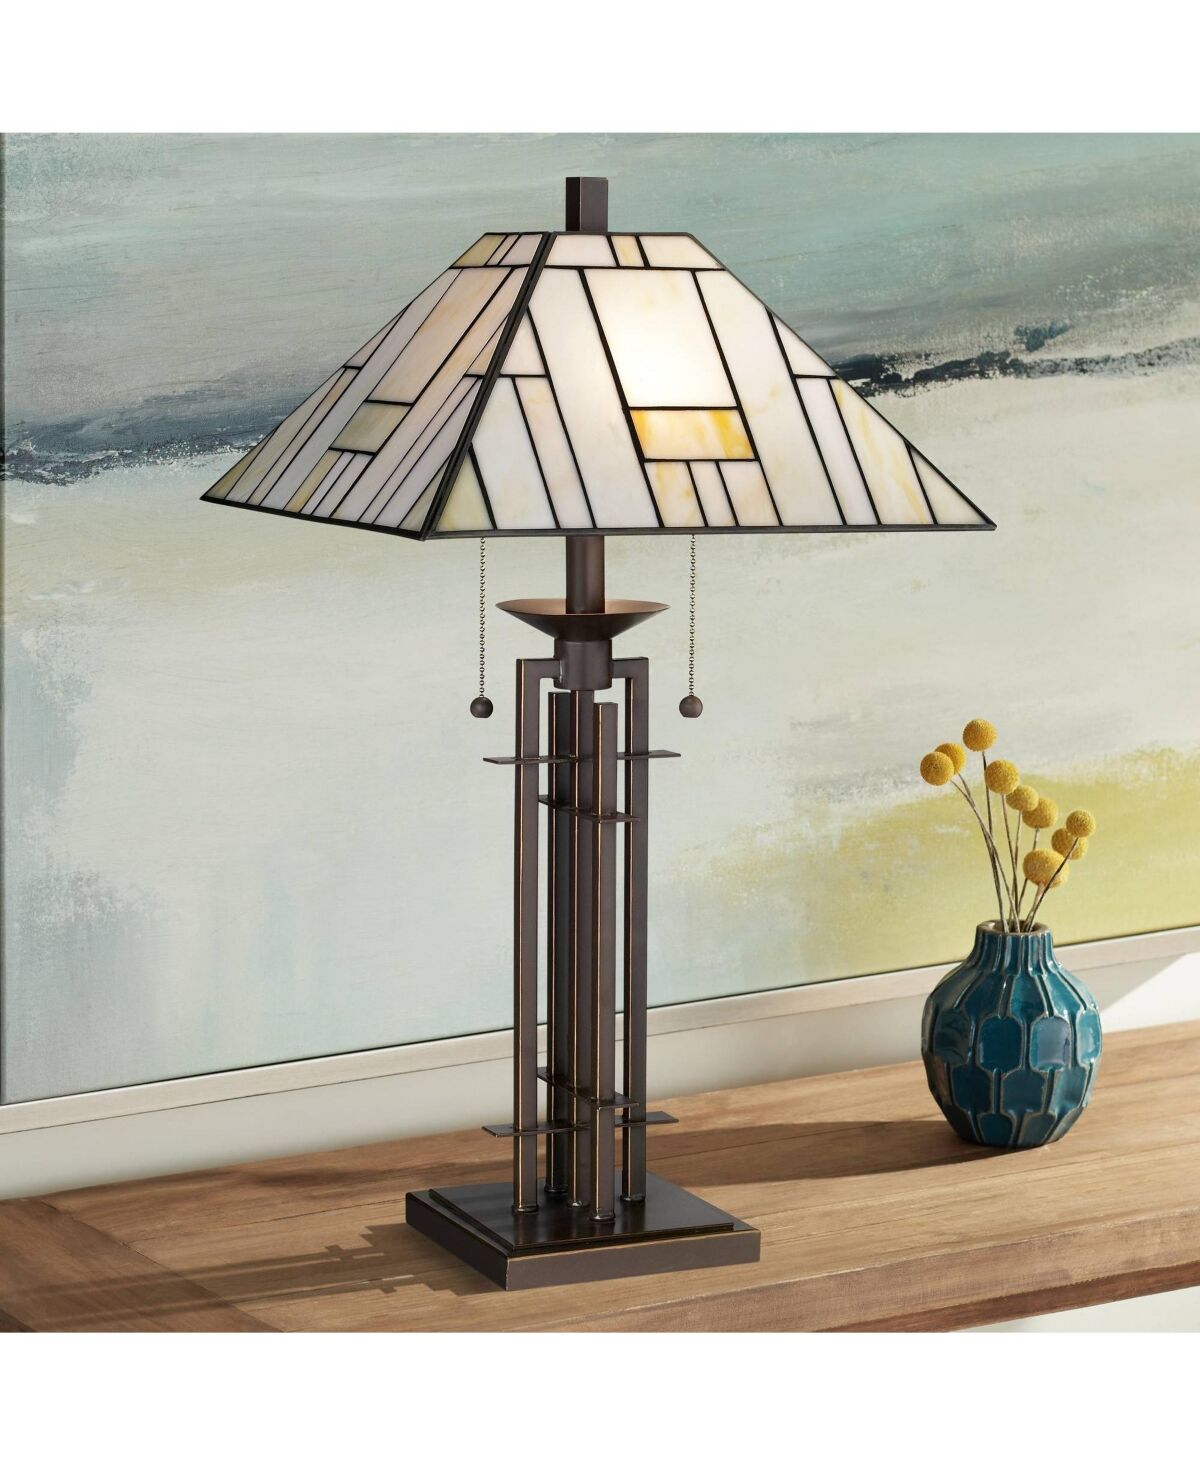 Franklin Iron Works Mission Tiffany Style Table Lamp Art Deco 26.25